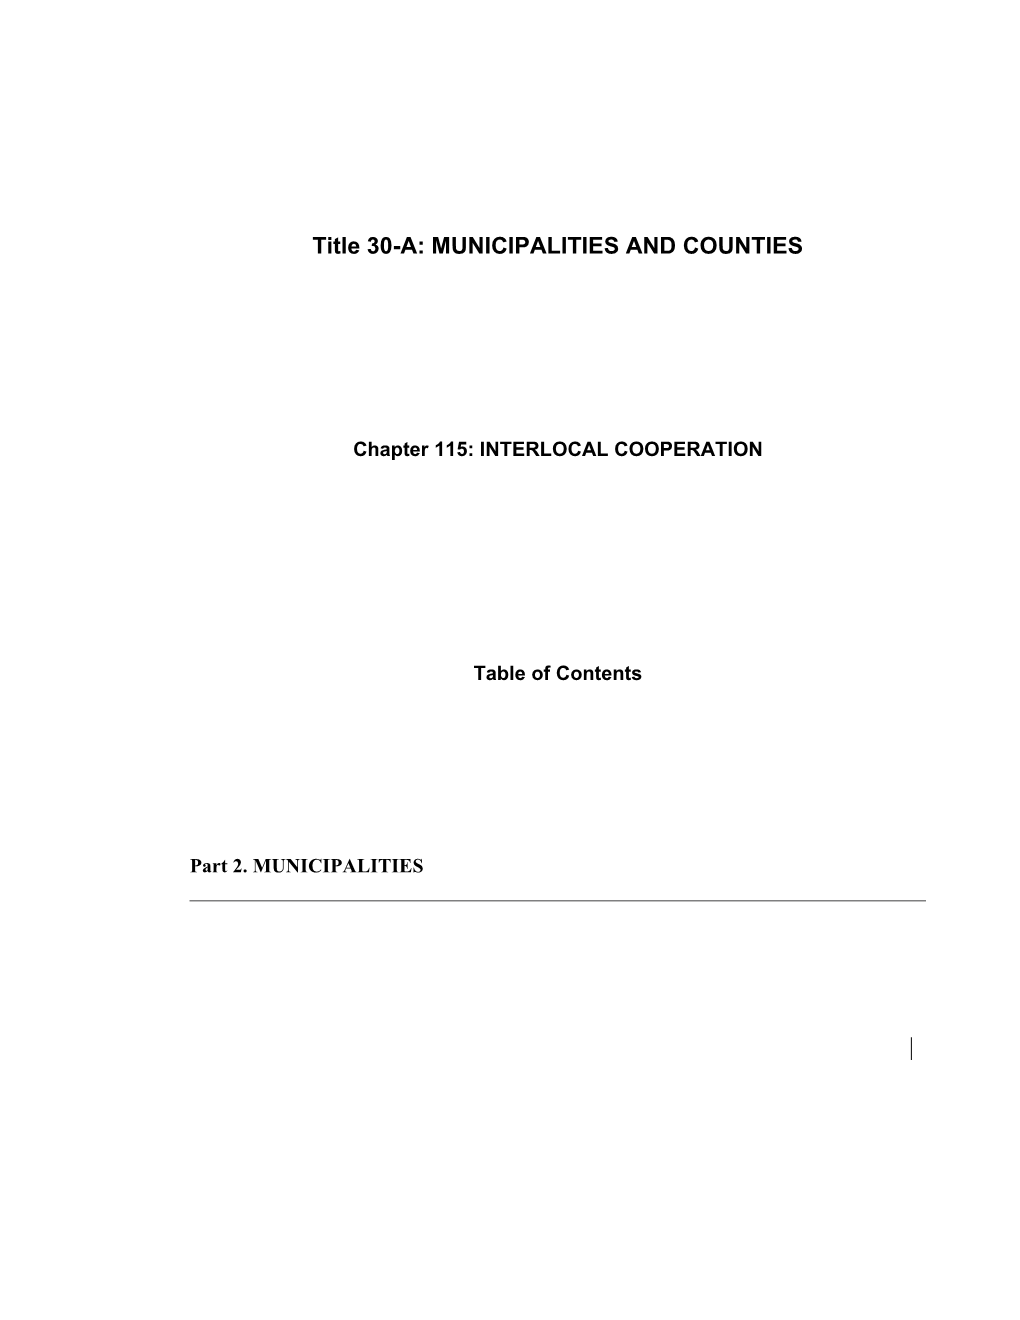 MRS Title 30-A, Chapter115: INTERLOCAL COOPERATION